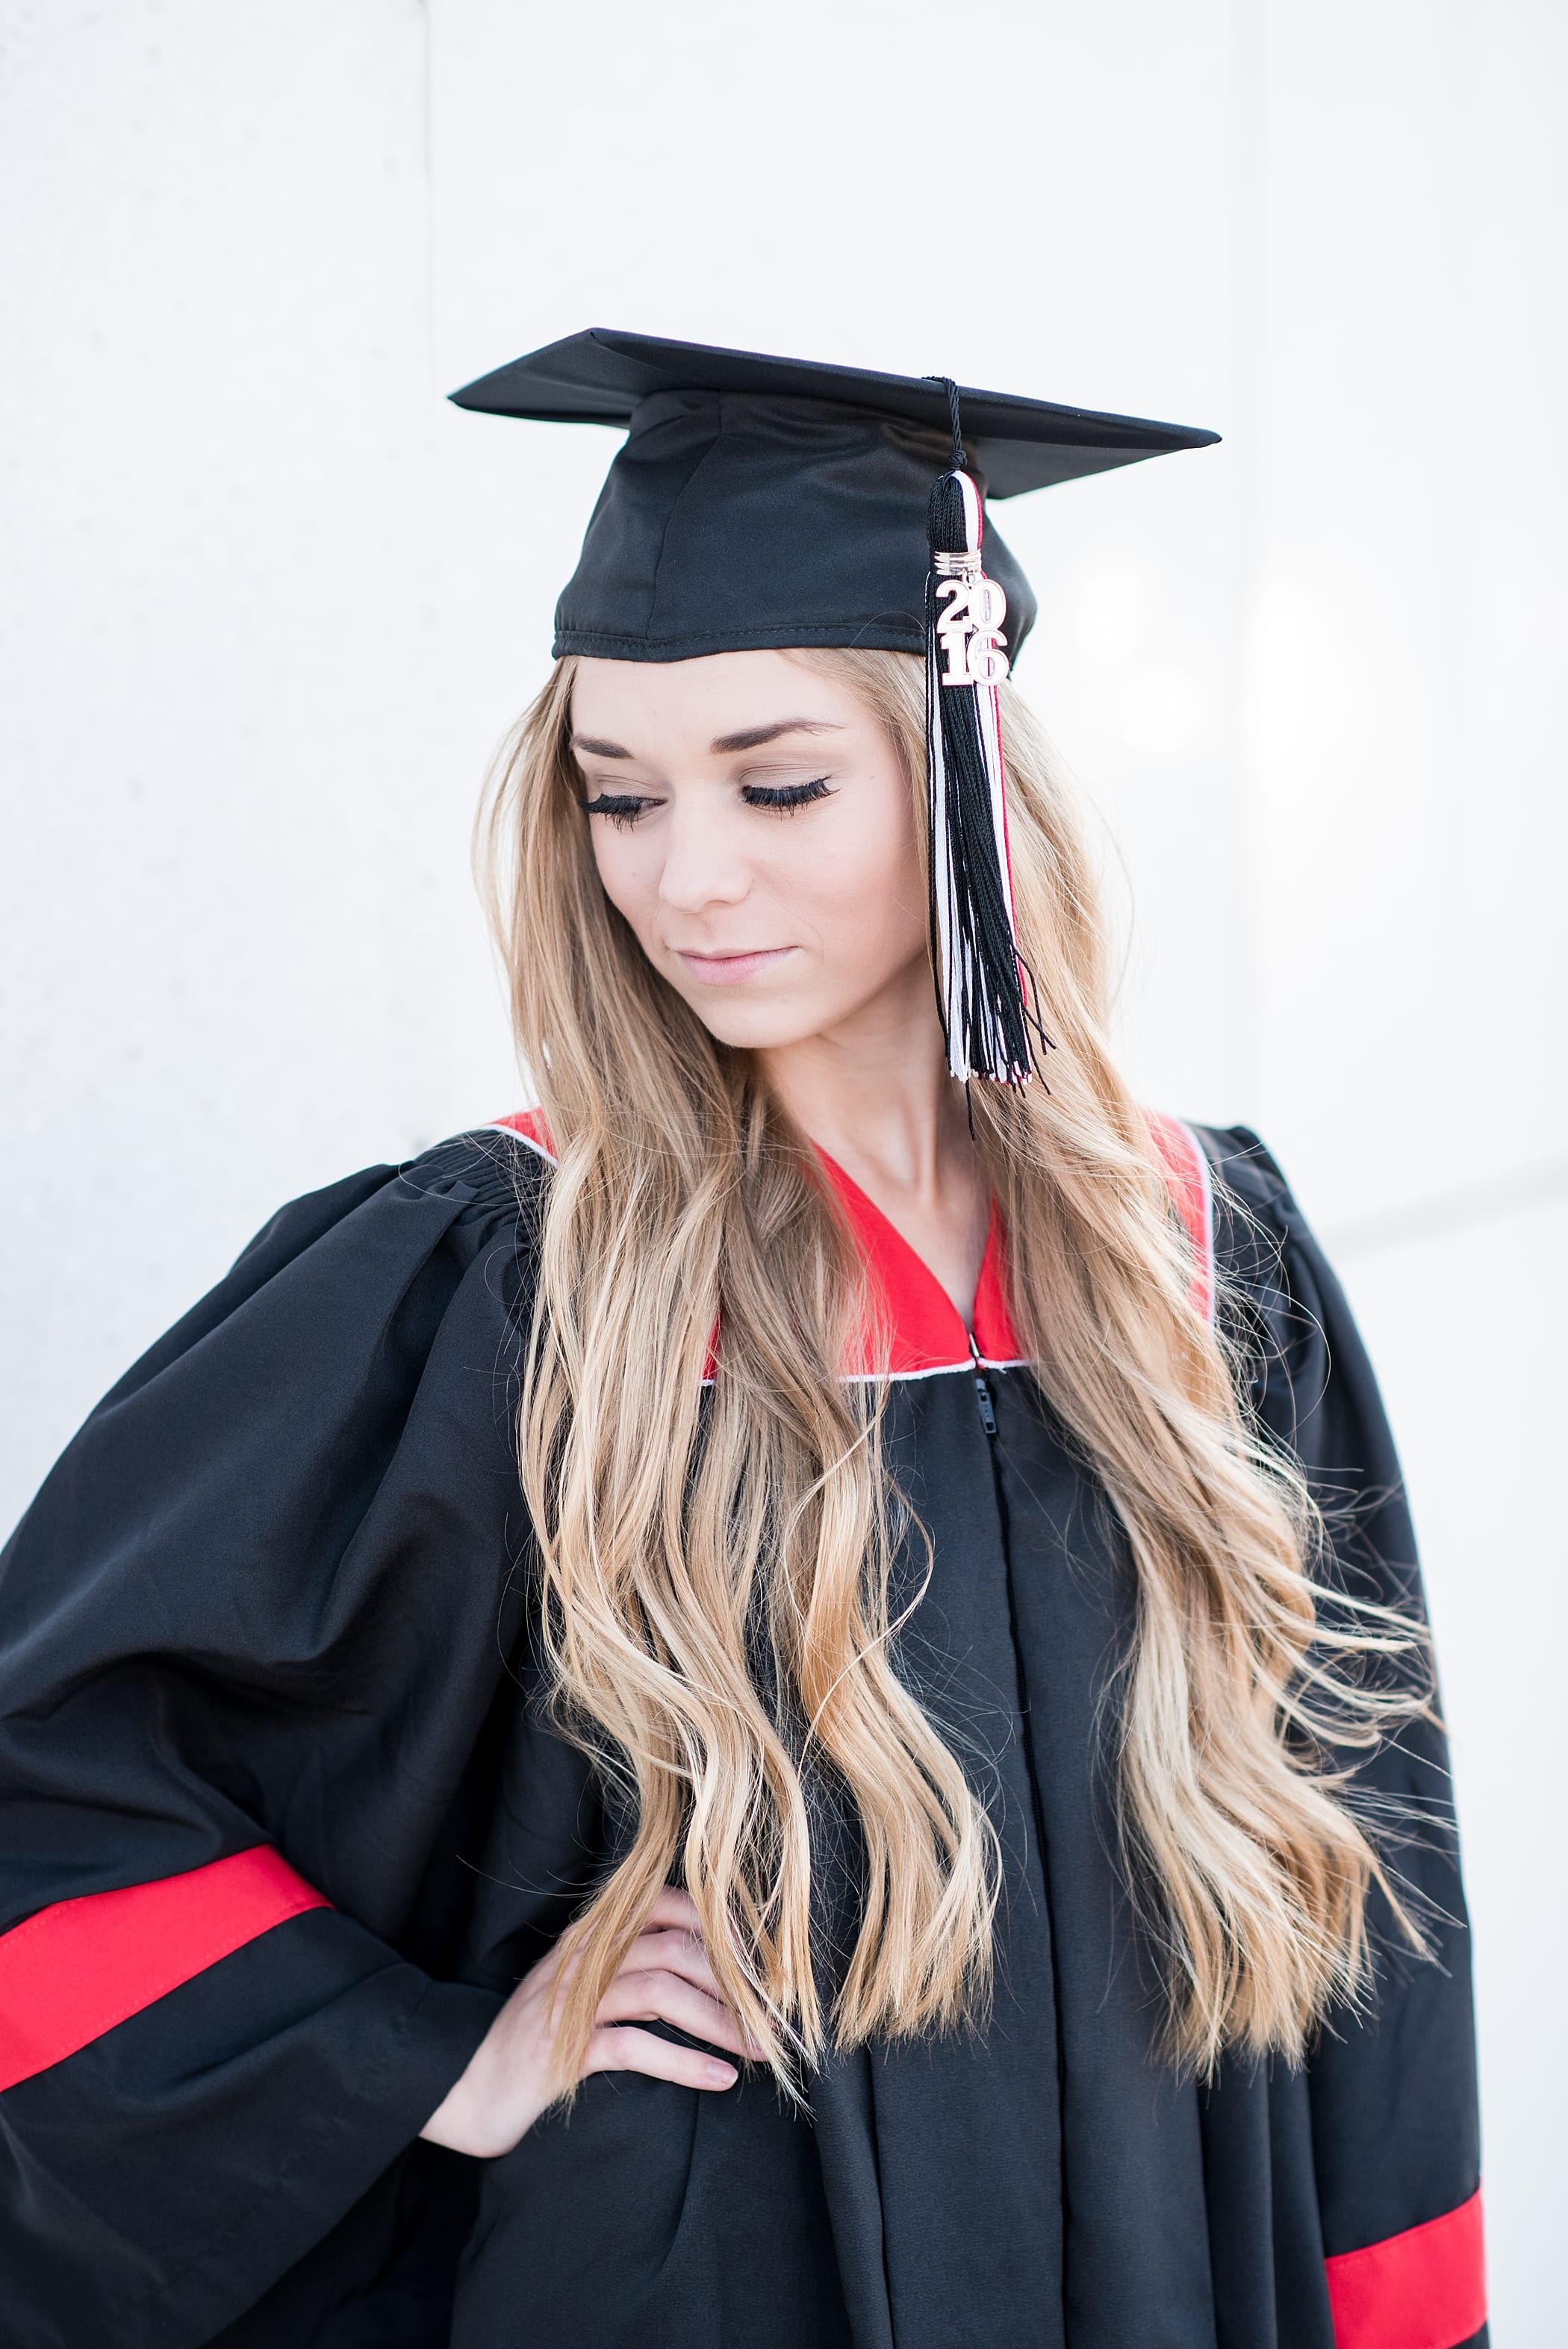 Senior Girl cap and gown Graduation Photos Downtown by Michelle & Logan